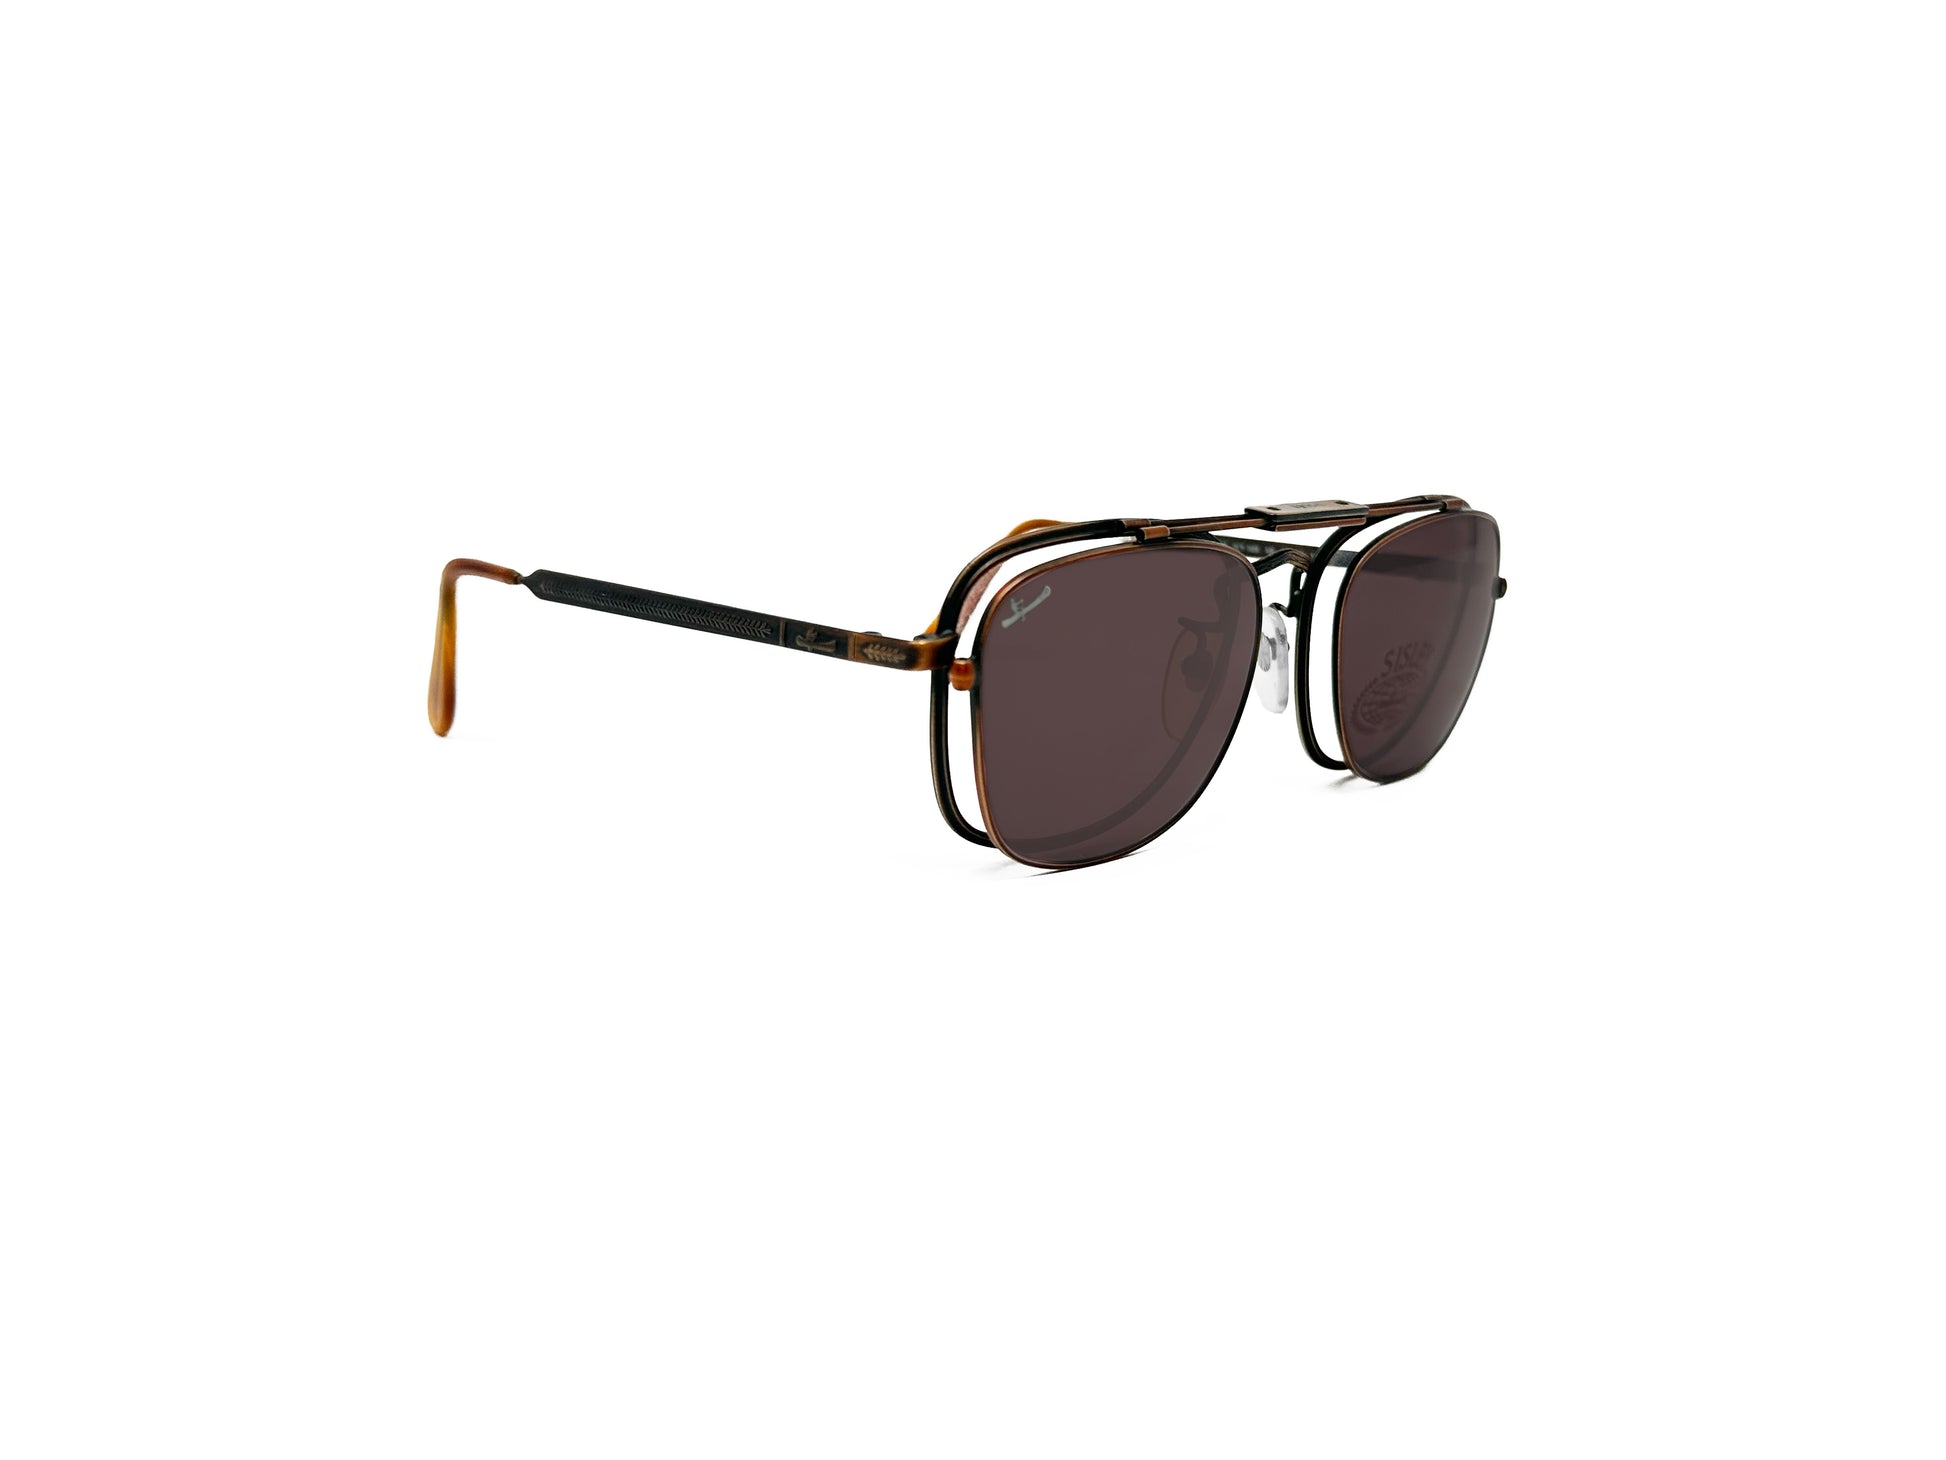 Sisley rounded-square flip-up sunglass with bar across top. Model: SL4. Color: 009 - Bronze. Side view. Shades flipped down.